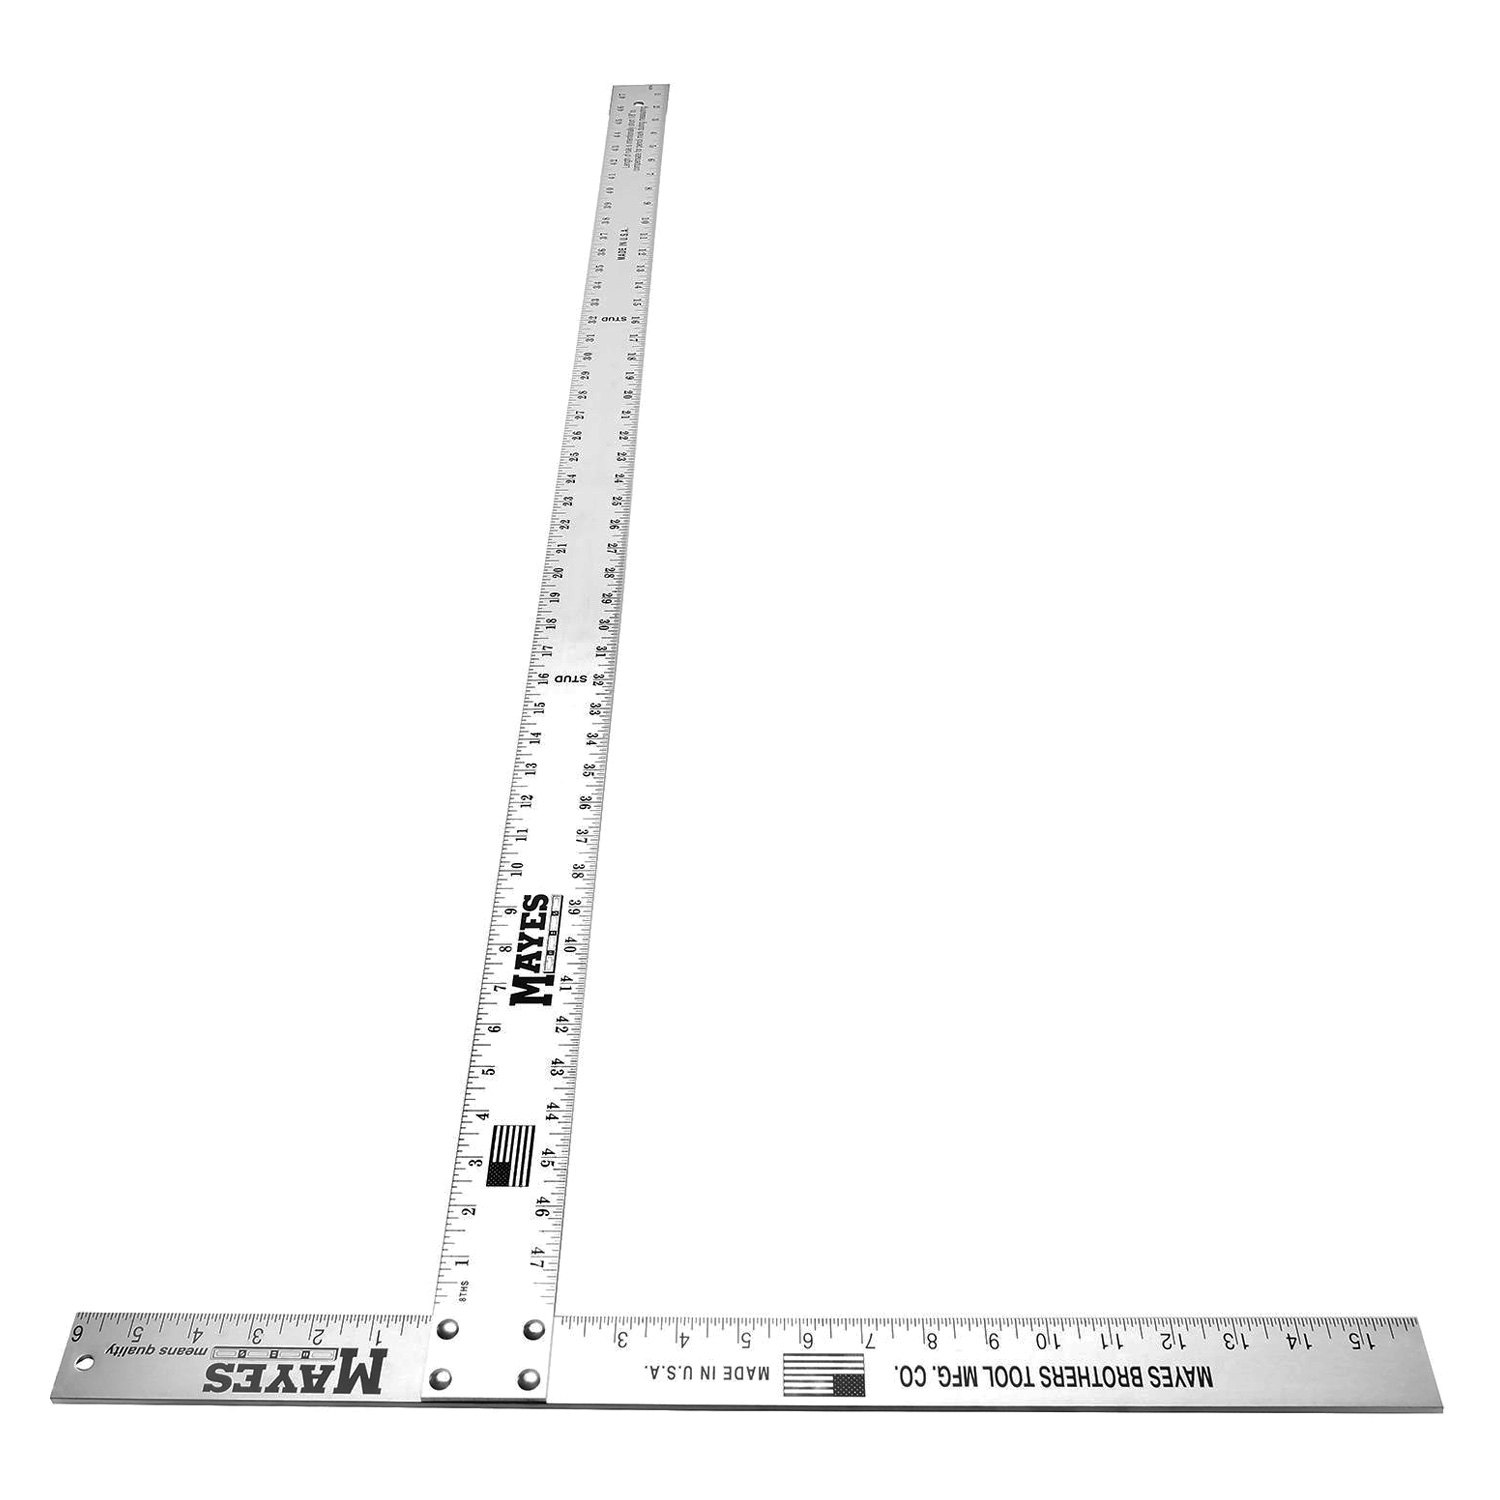 Mayes 48 inch T Square - General Merchandise > Tools